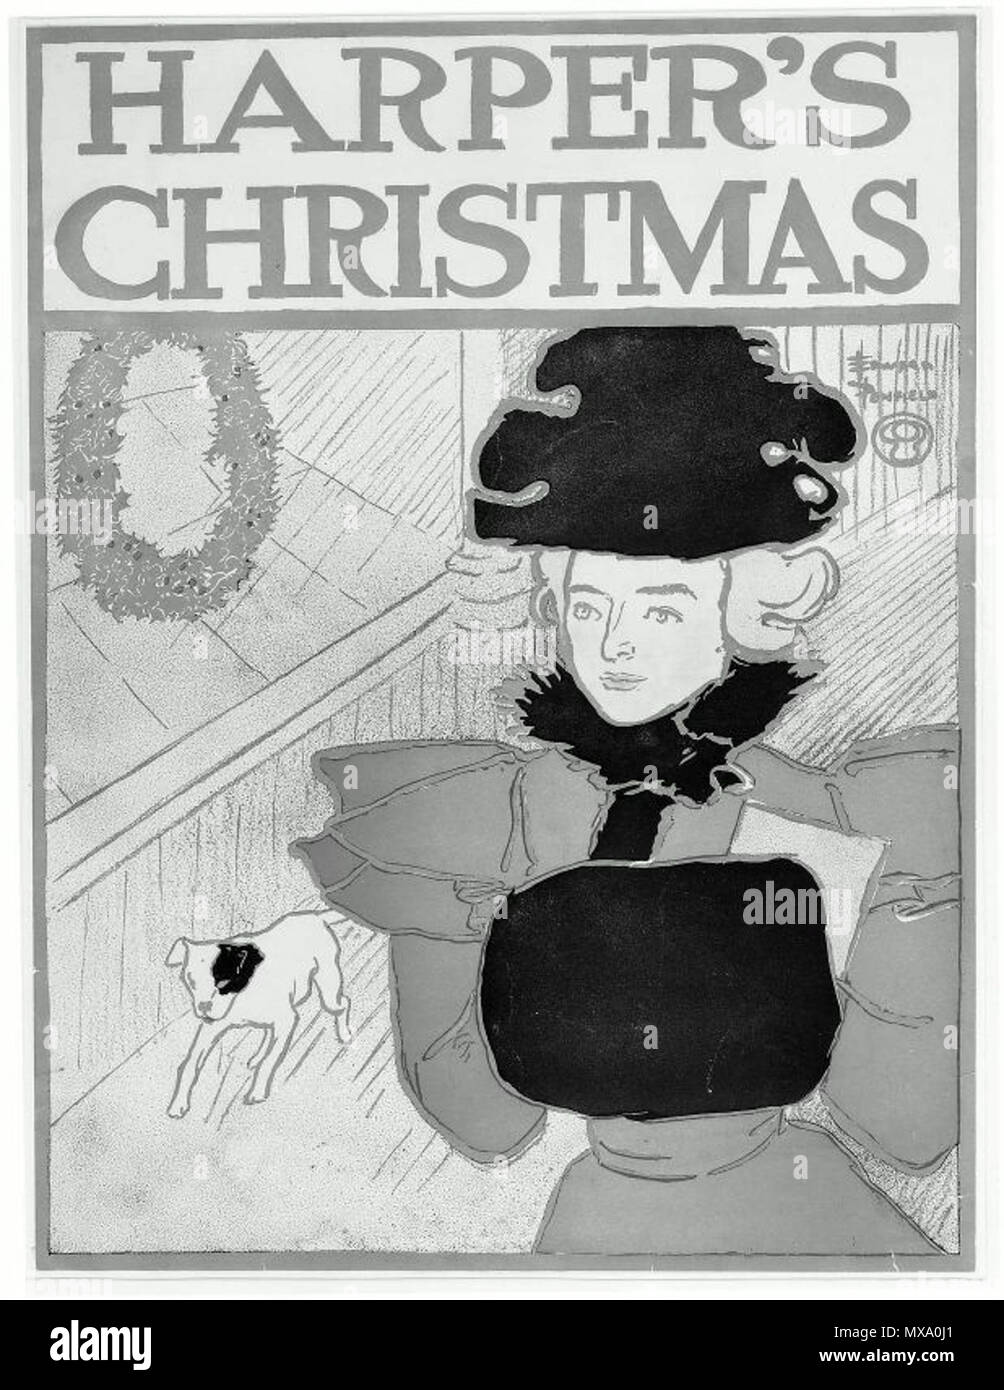 . English: Harper's Christmas. about 1895. Publisher: Harper & Brothers. United States. 44 x 33 cm (17 5/16 x 13 in.). Chromolithograph. Classification: Prints. Type, sub-type: Poster. Museum of Fine Arts, Boston. circa 1895. Harpers 267 Harpers Christmas ca1895 Stock Photo